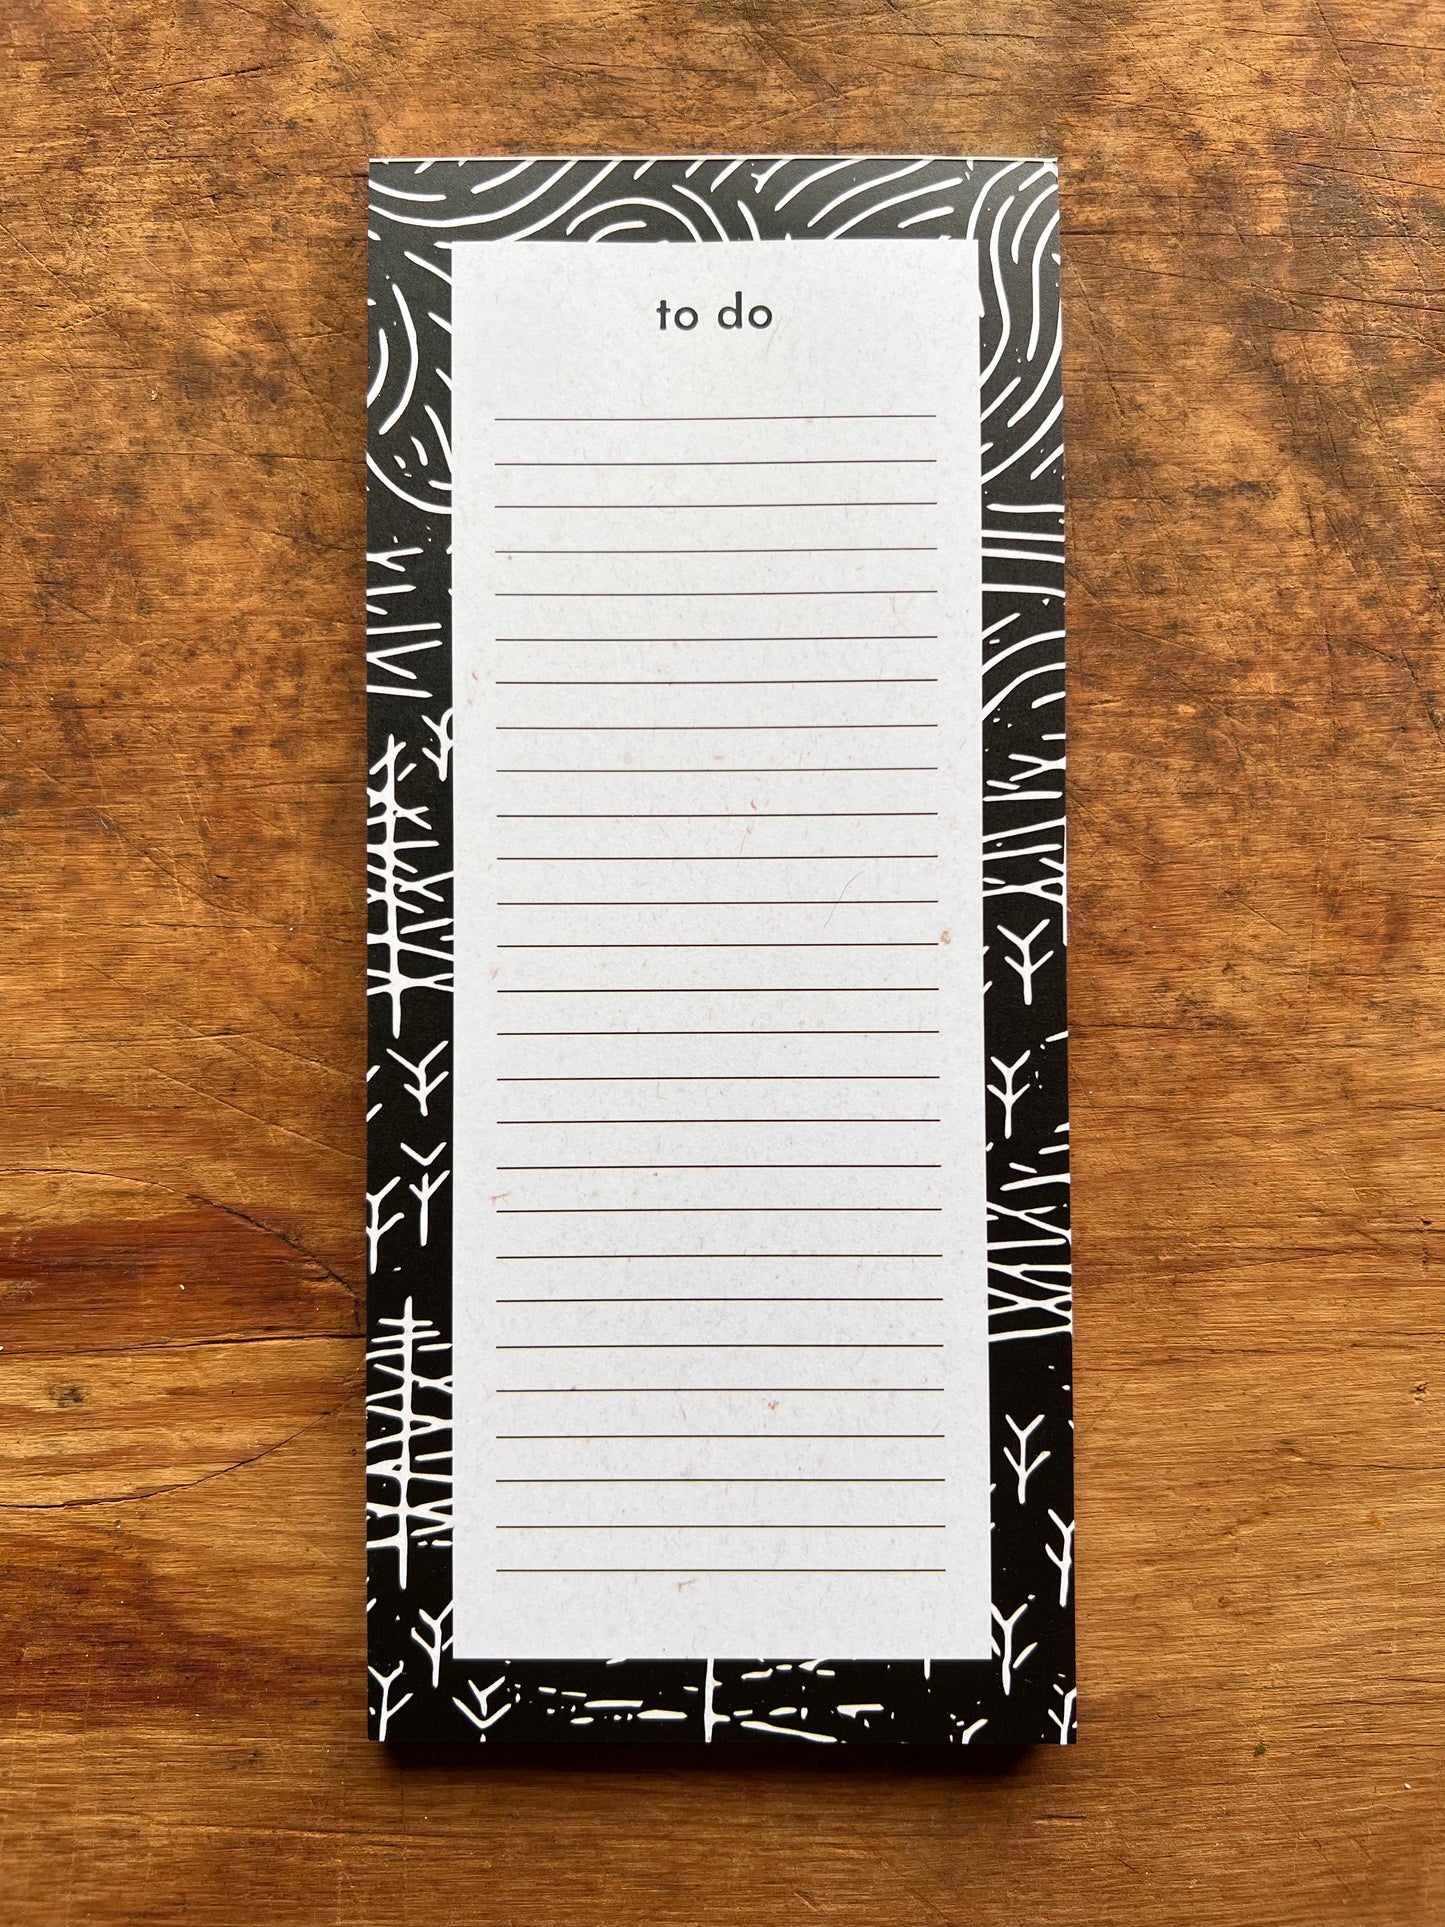 Pine Forest To Do List Notepad 4x9” | 50 Sheet Linocut Illustrated Notepad